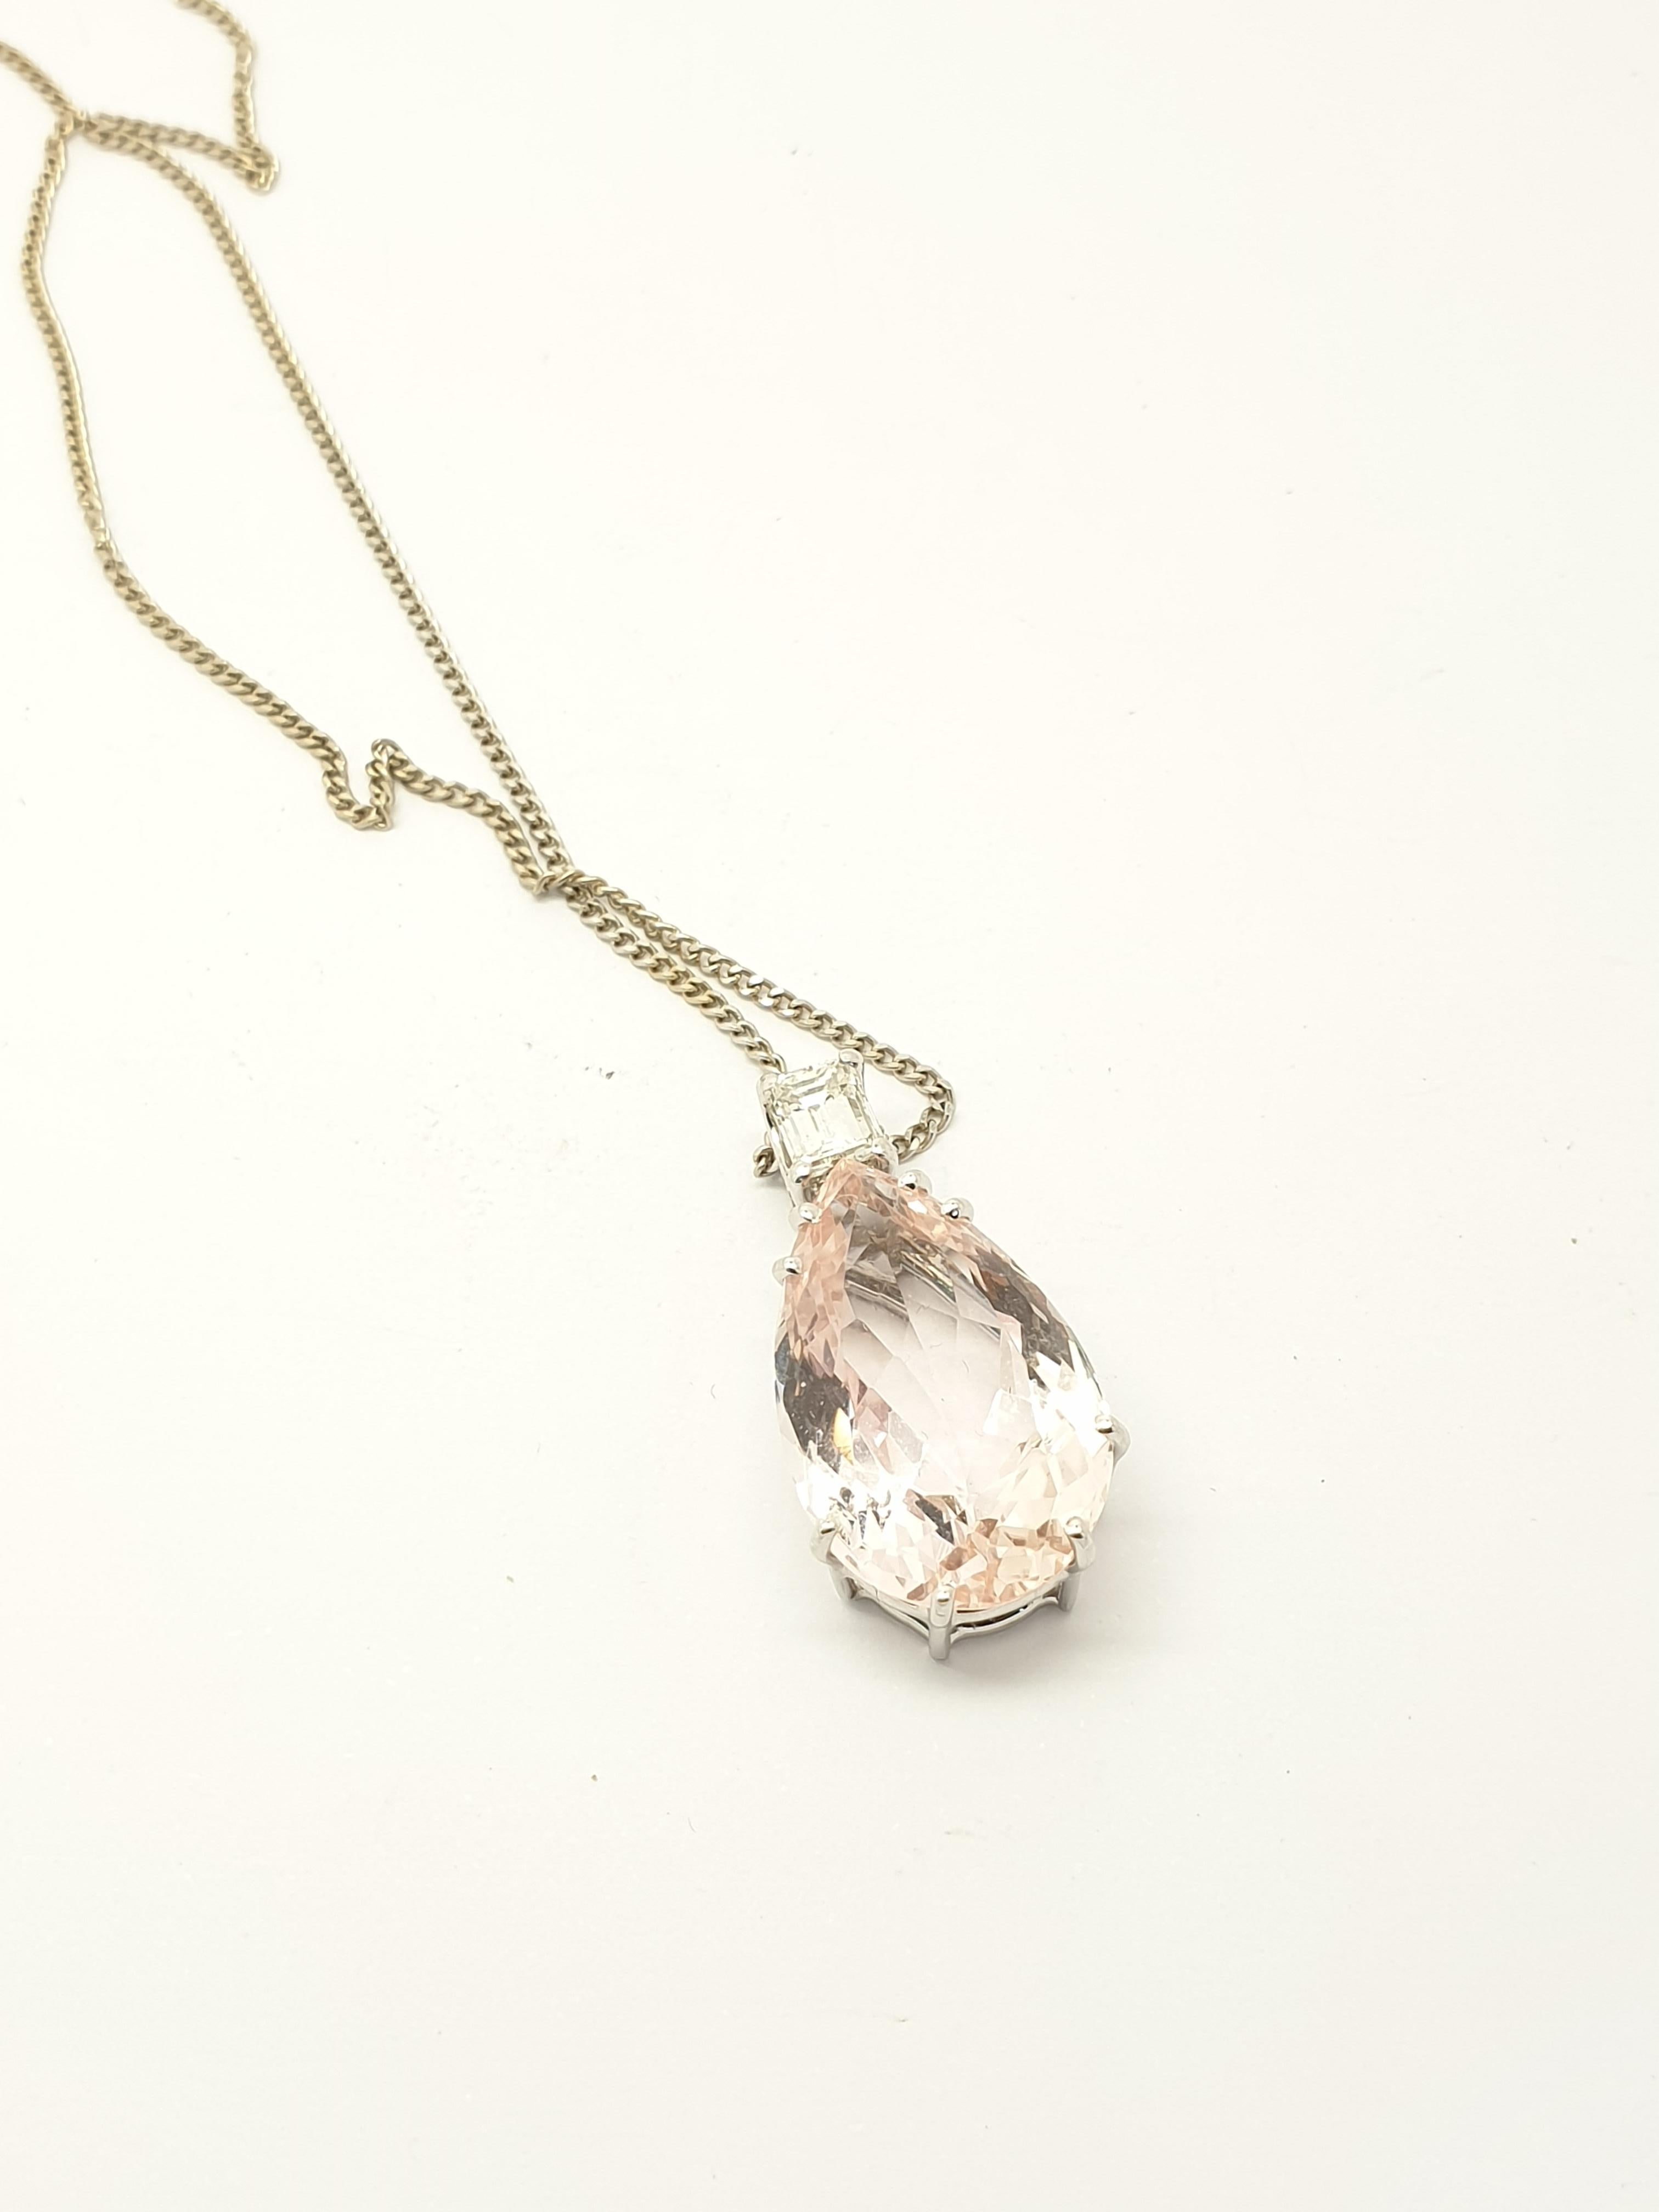 Offering a modern kunzite  diamond  necklace. The icy pink kunzite is tear drop shape set into 18kt white gold. It is 20 mm (length) 0.20ct emerald cut diamond set  on the top of the stone.The fine 18 k white gold chain is  perfect match with the